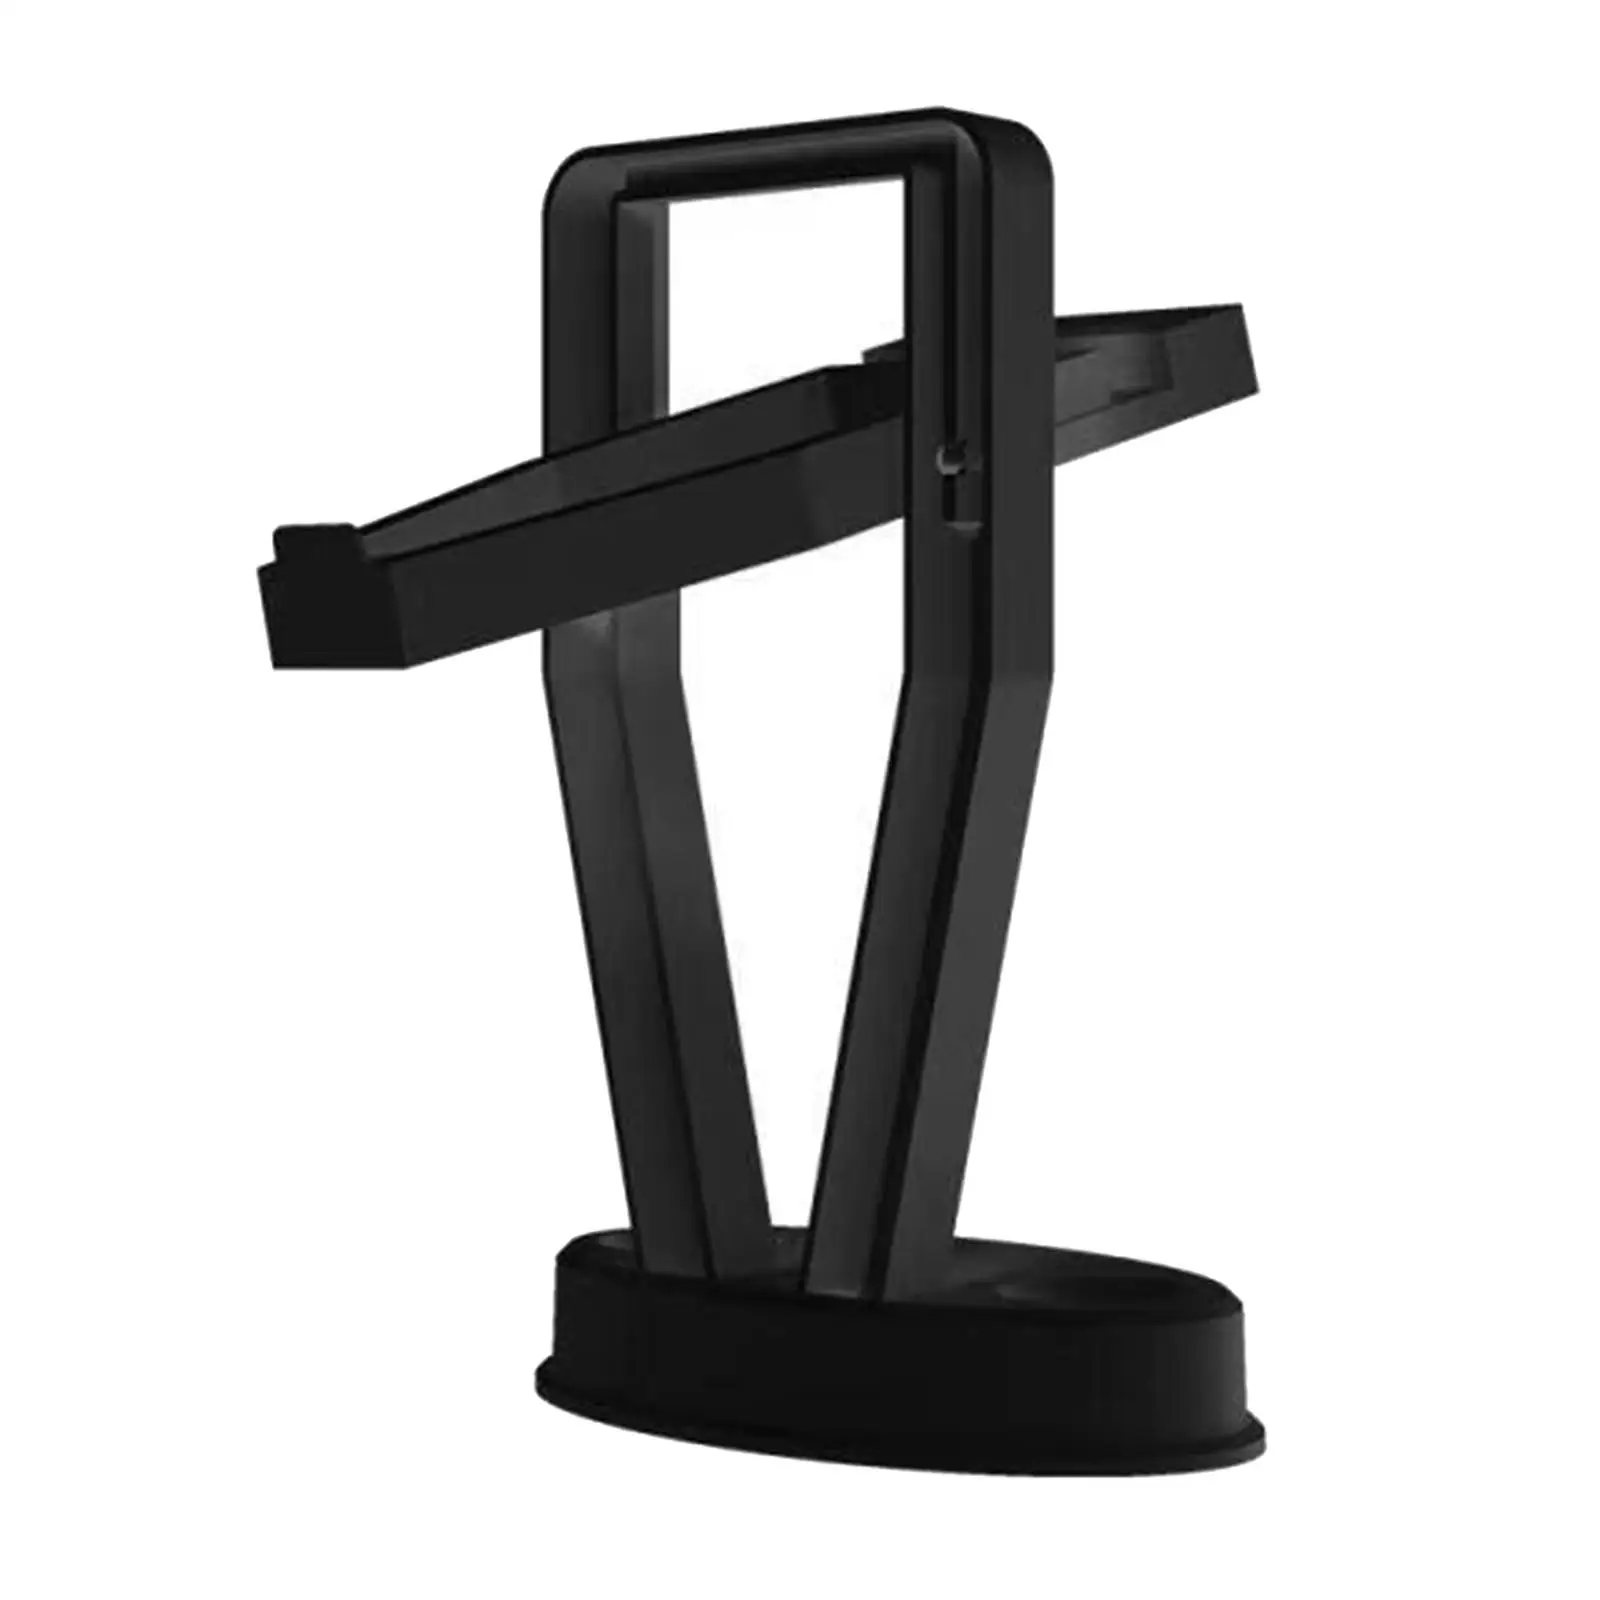 VR Headset Display Stand Stable Stents for Quest 2/PS VR Headset